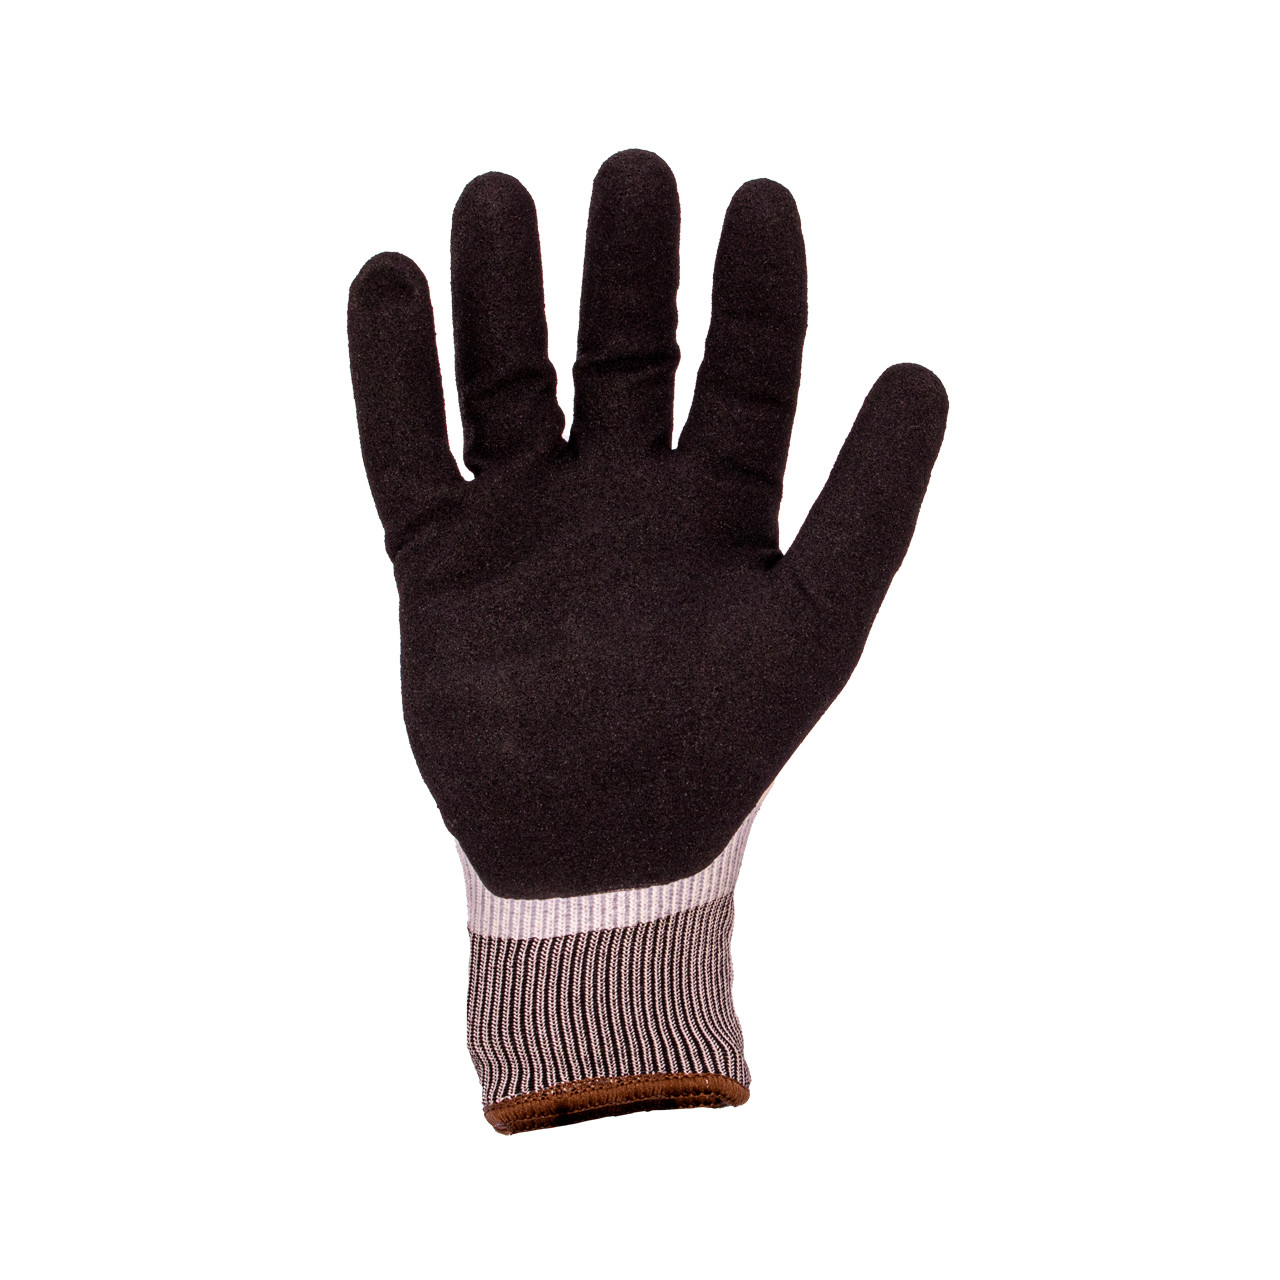 Ironclad Cyro A2 Nitrile Touchscreen Winter Gloves from Columbia Safety